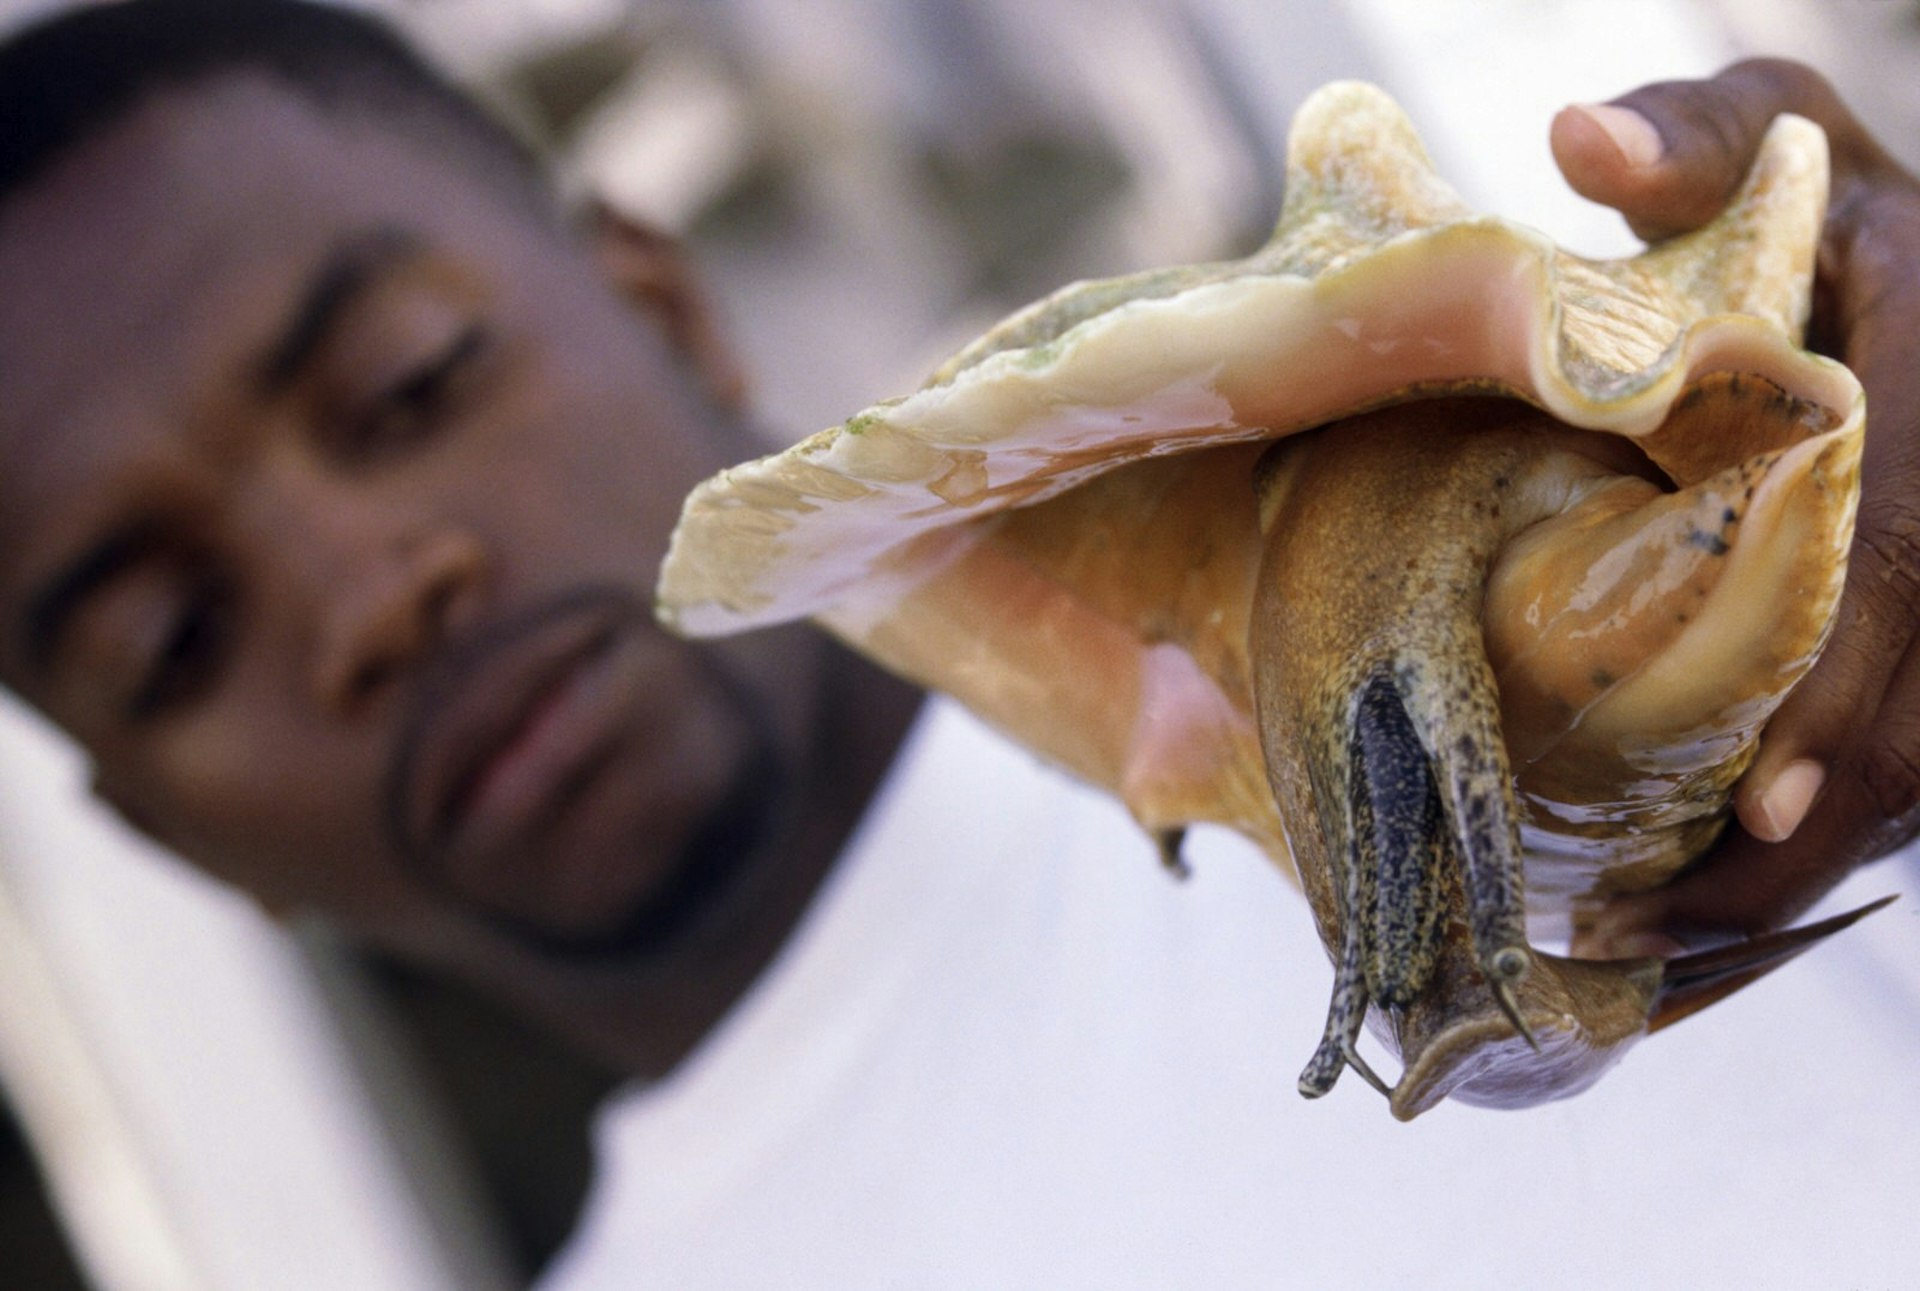 Man holding conch shell with molusc emerging from inside on Conch farm. Many conch, such as the Queen Conch, are found among beds of sea grass in warm tropical waters. Strombus gigas is included in Appendix II of the UNEP's CITES list of endangered species